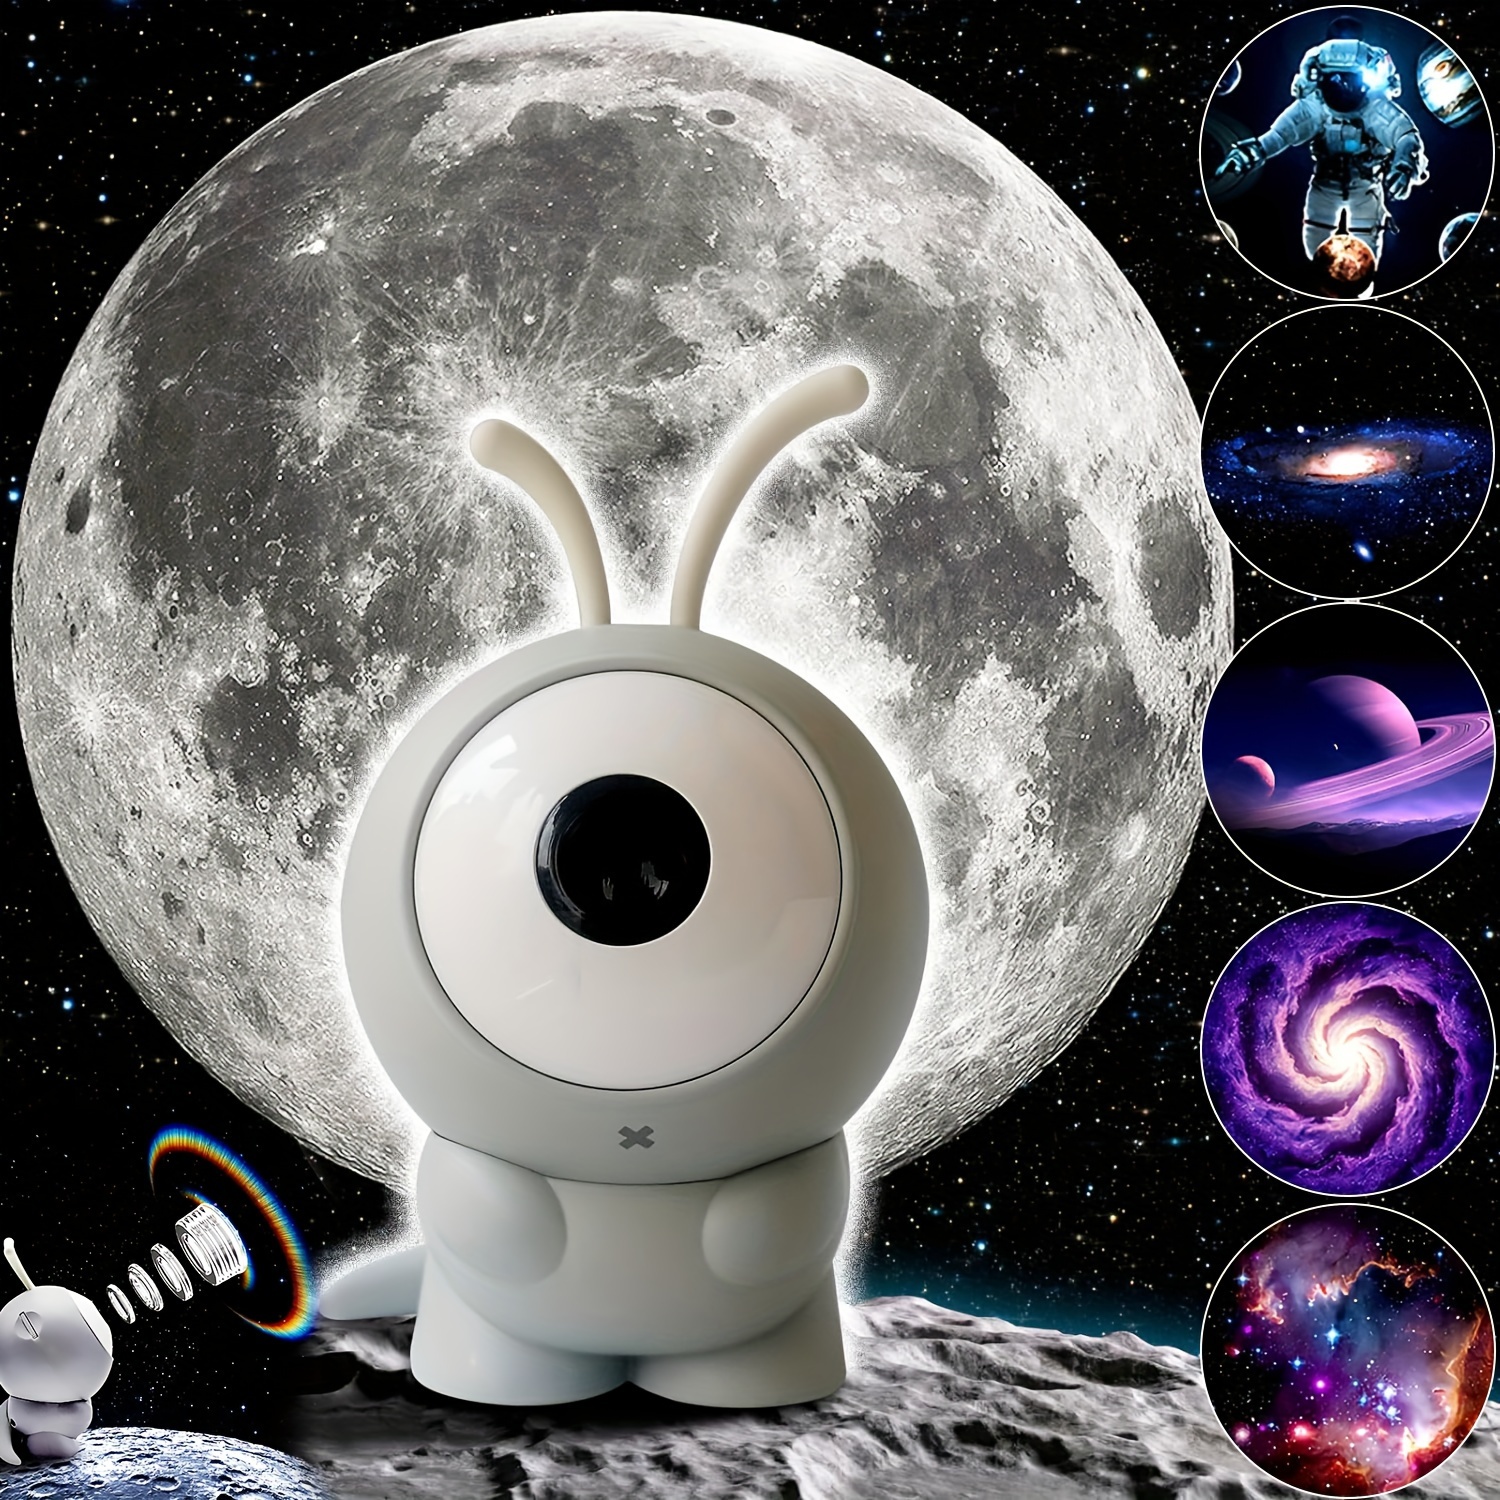 

1pc Monster Galaxy Projector Lamp, Star Projector Light With 6 Patterns, 360° Rotatable Cute Moon Projector For Bedroom Living Room, Desktop Gift For Friend Family Mother's Day And Lover